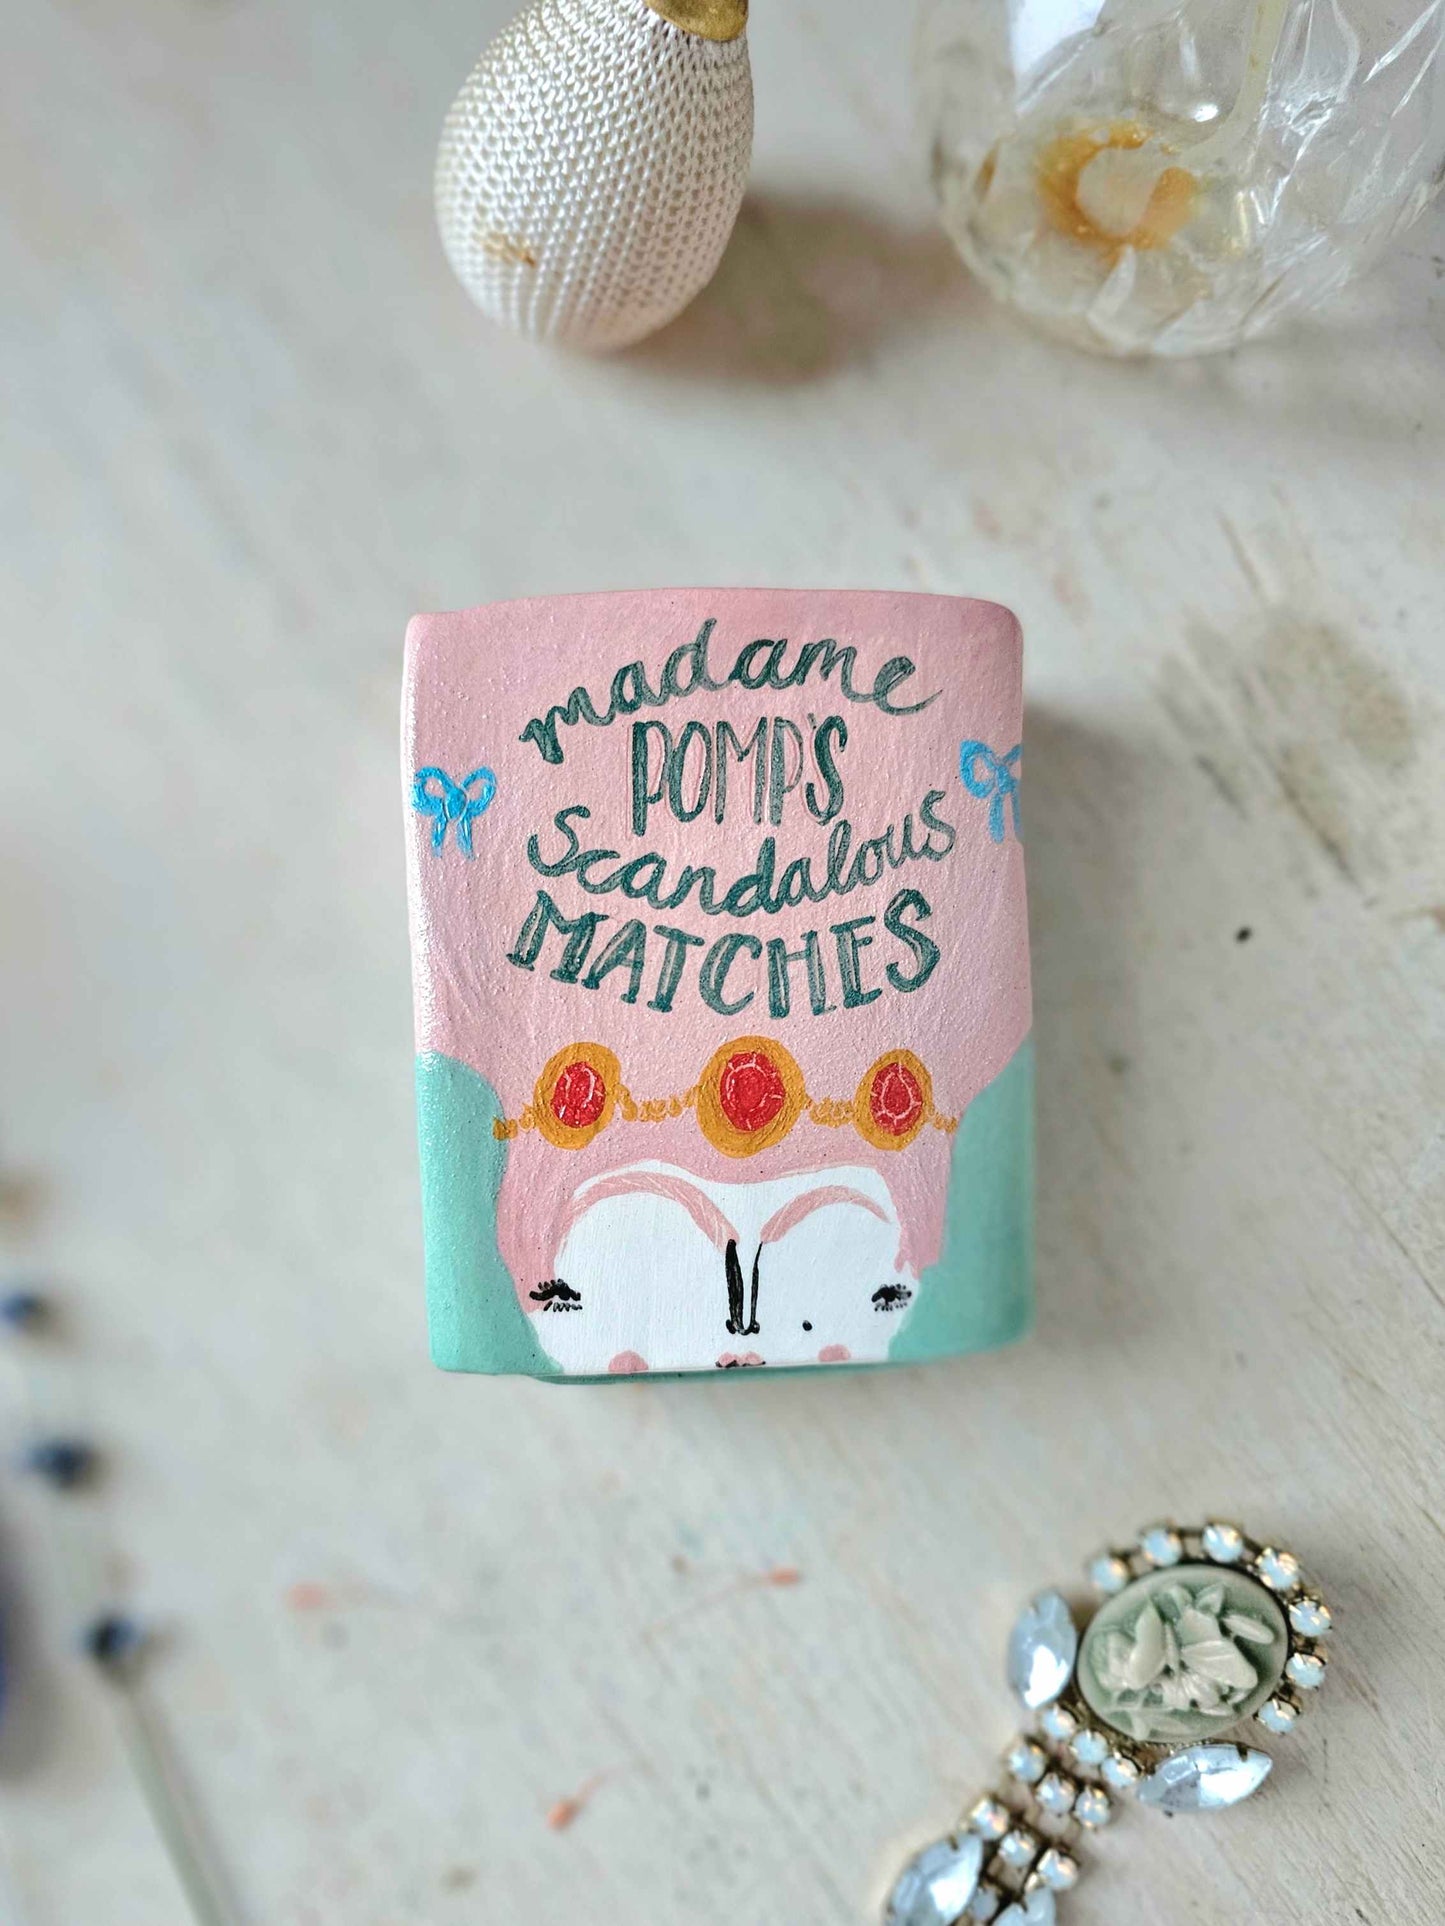 Made to order: Madame Pomp's Scandalous matches small ceramic matchbox